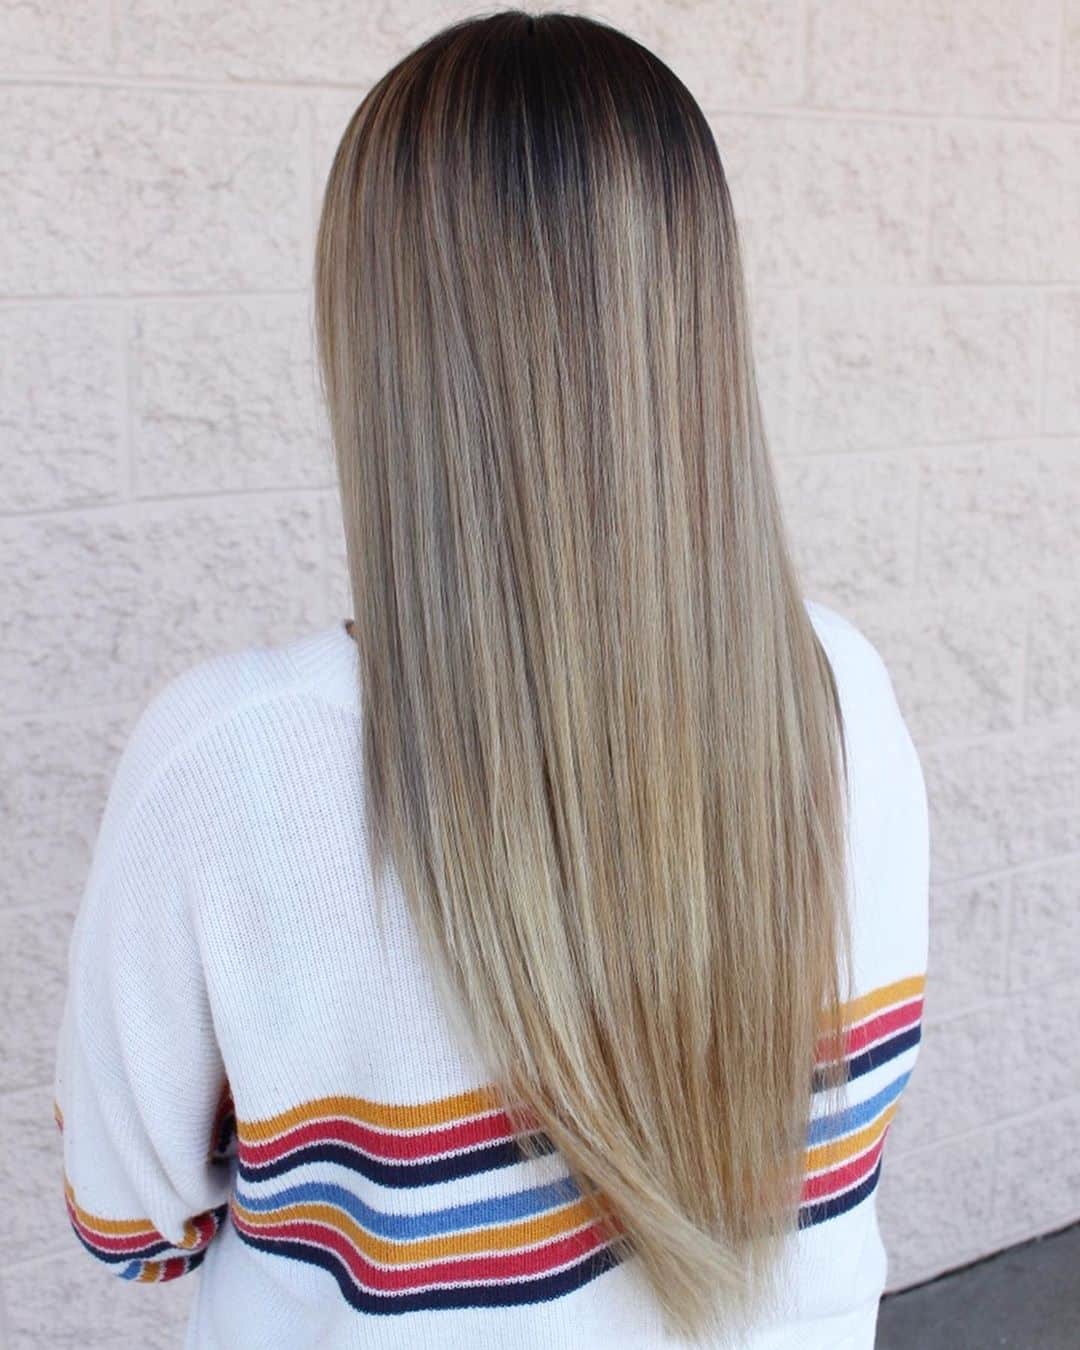 26 Best Brown to Blonde Hair Color Ideas and Tips